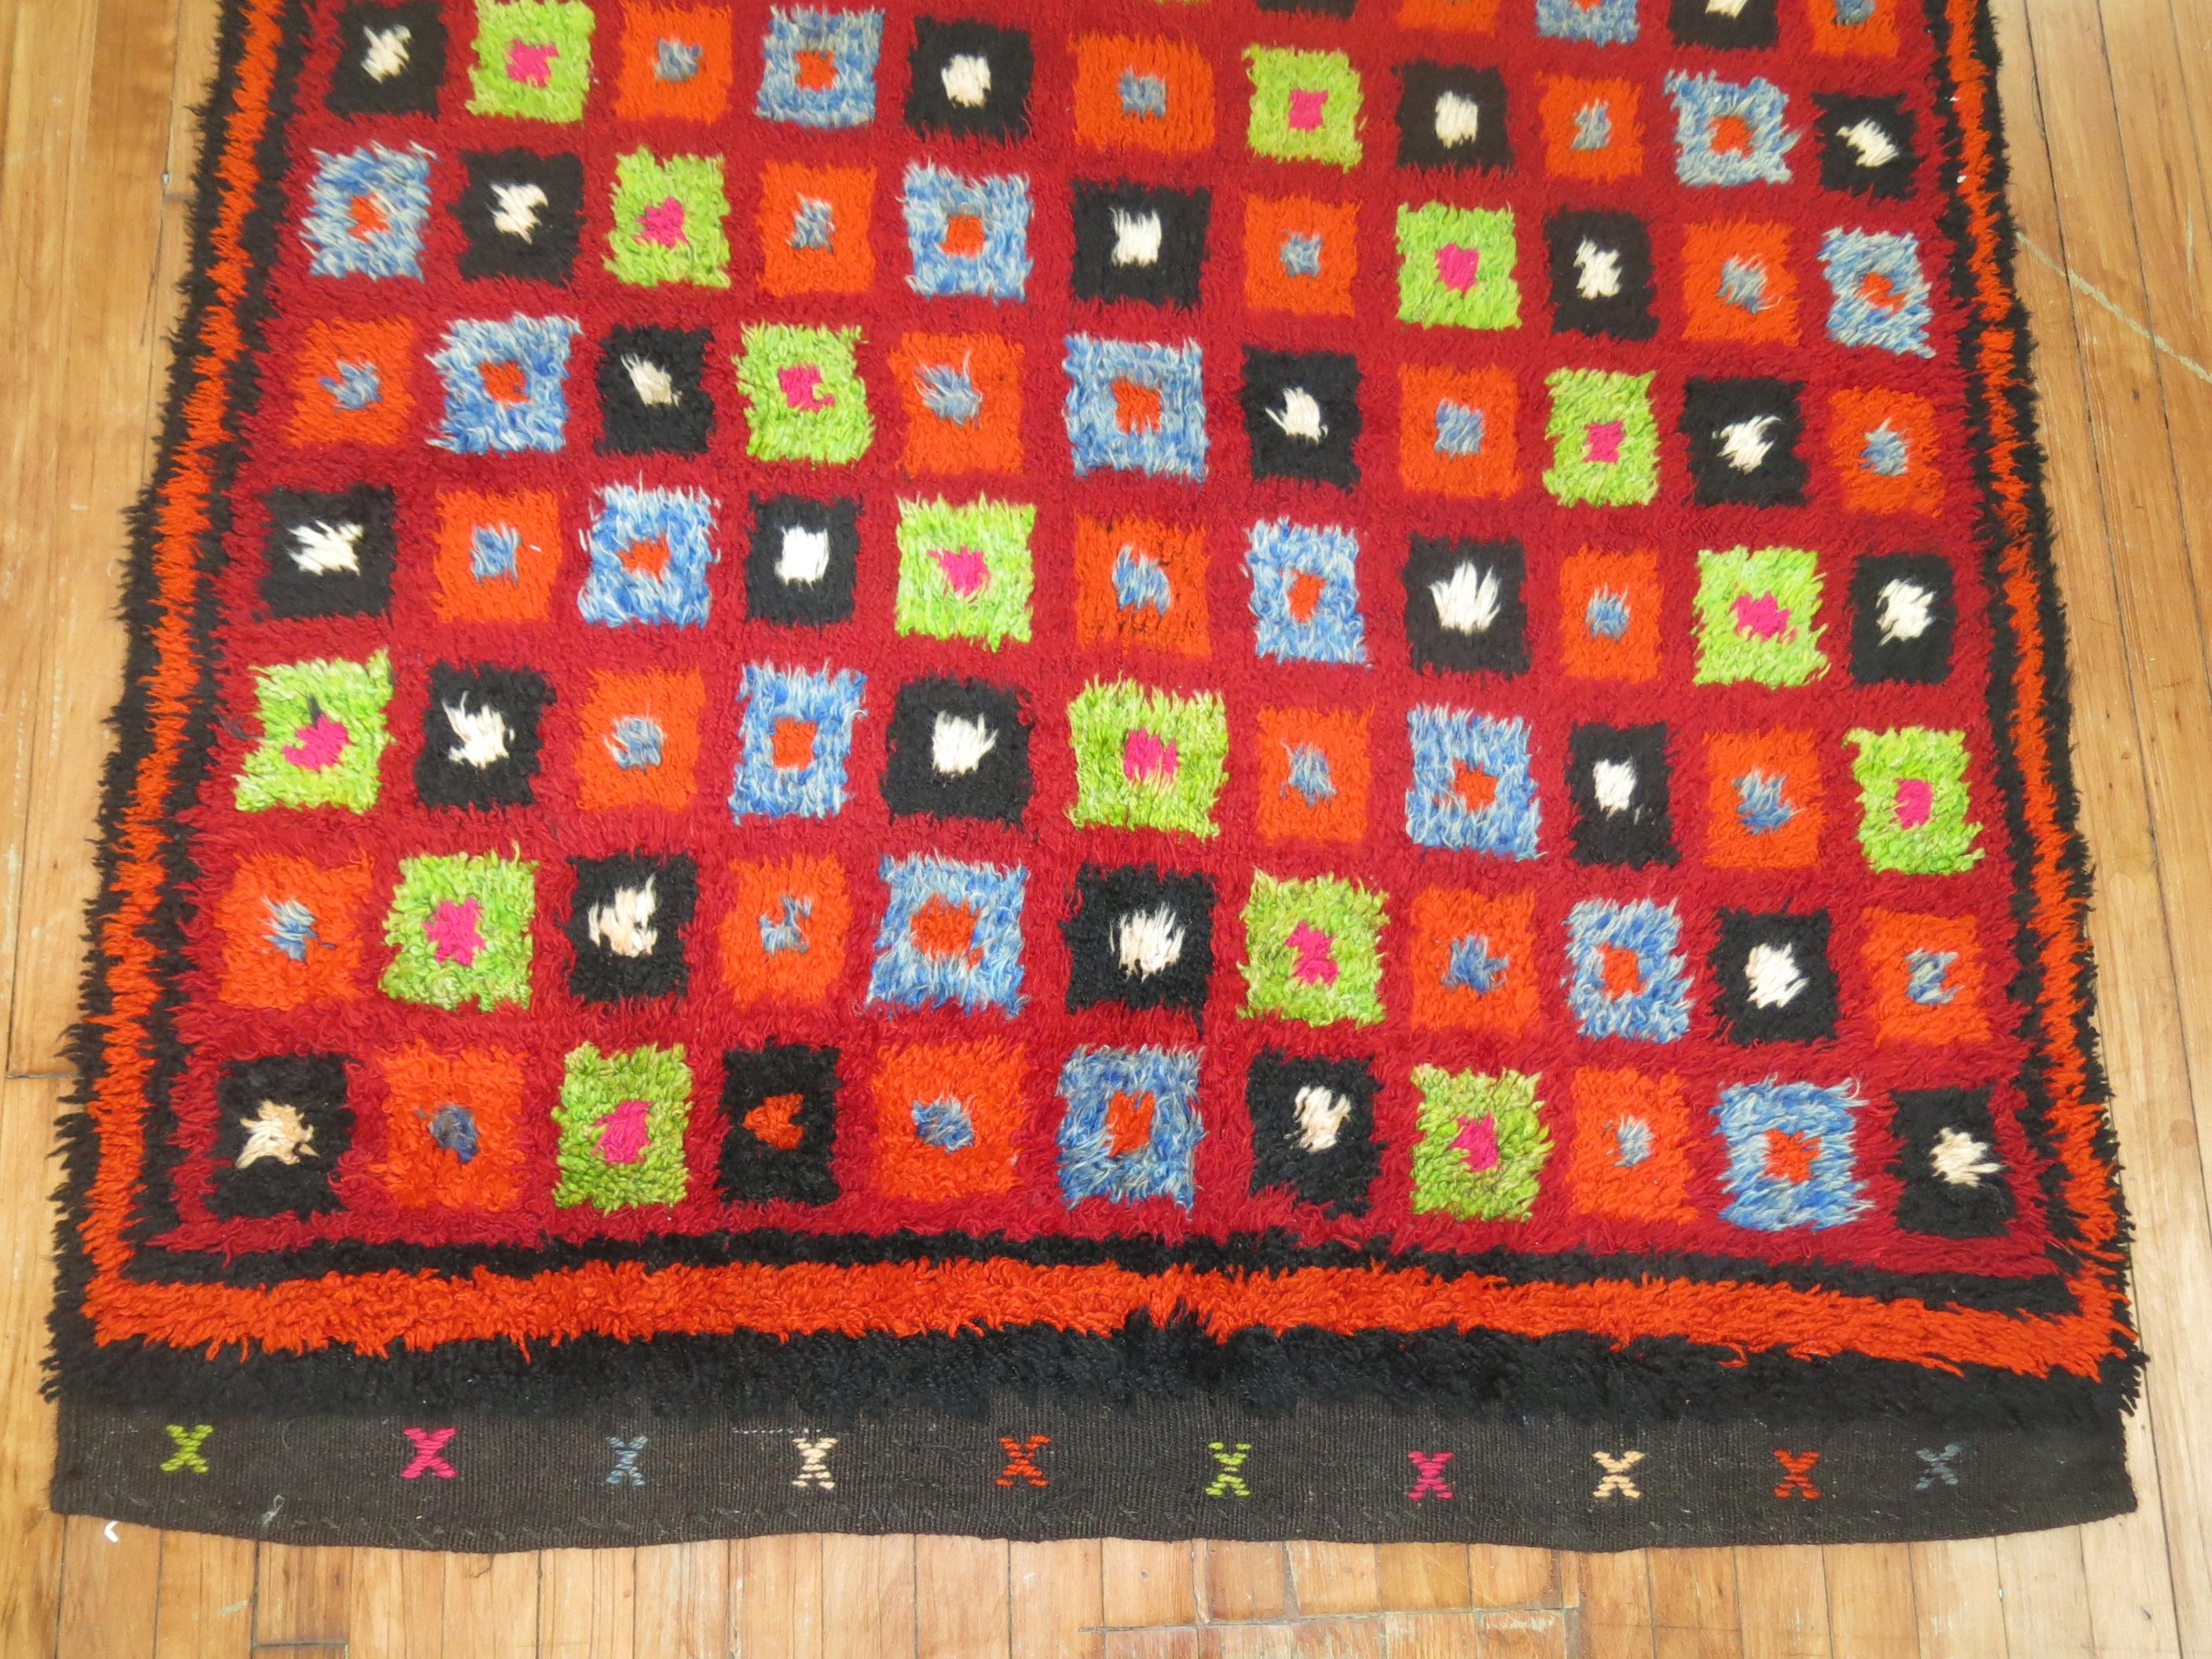 Bright colors highlight this mid-20th century intage Turkish Tulu rug.

4' x 4'11''